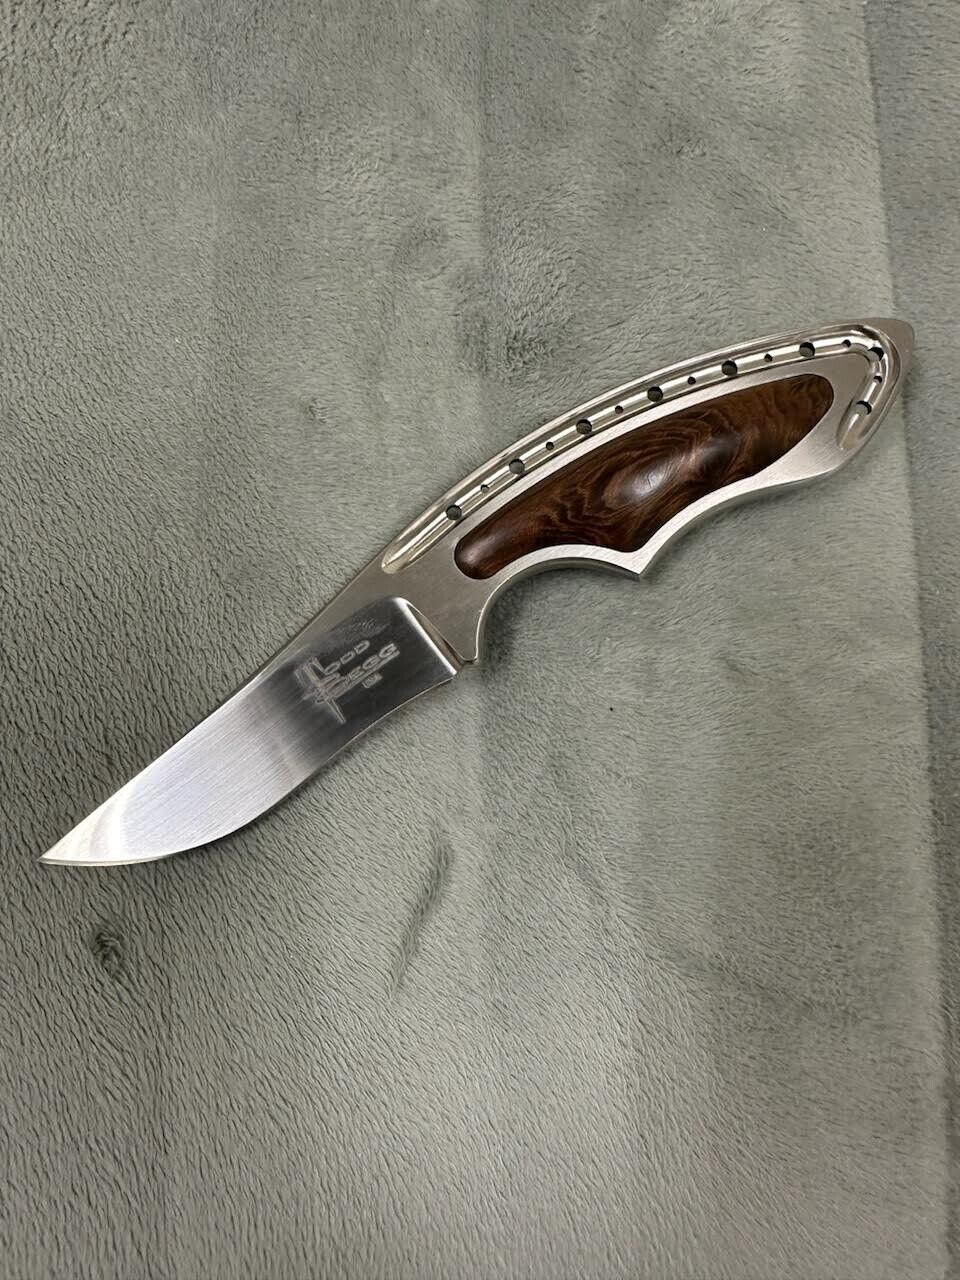 Todd Begg custom knife with hand crafted leather sheath. Beautiful and new.